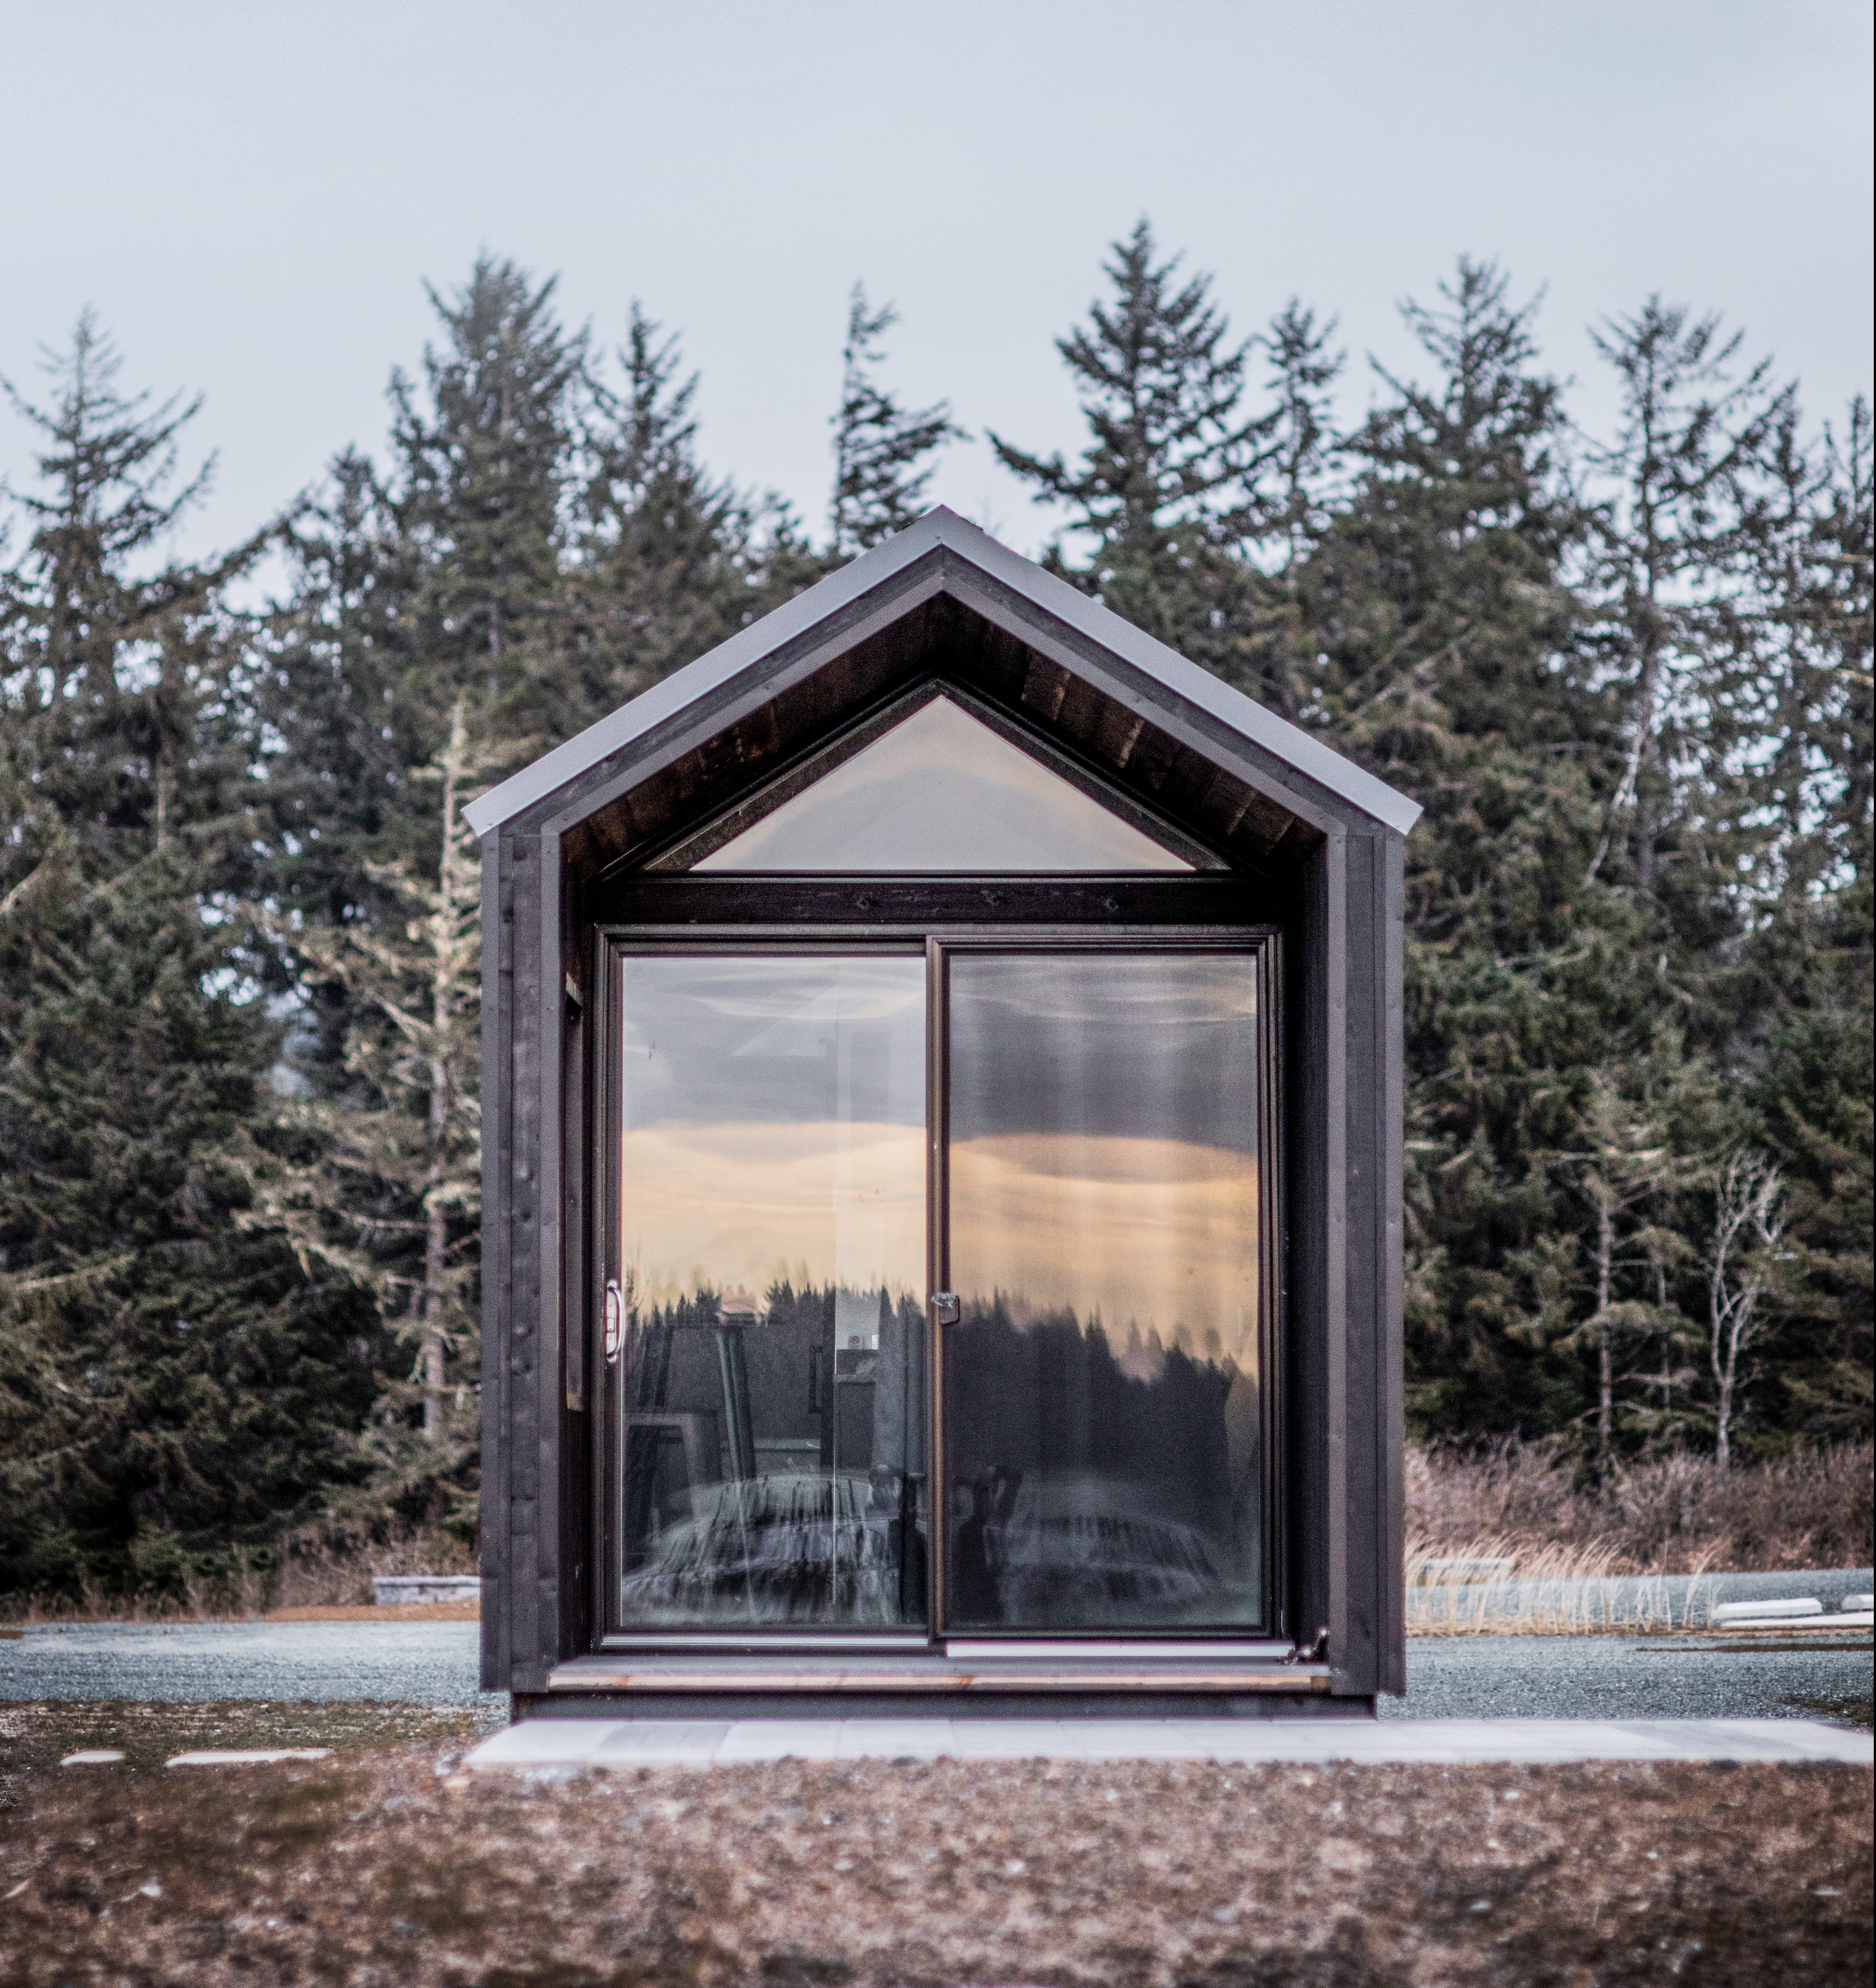 These Modern Cabins Bring Glamping To The Oregon Coast